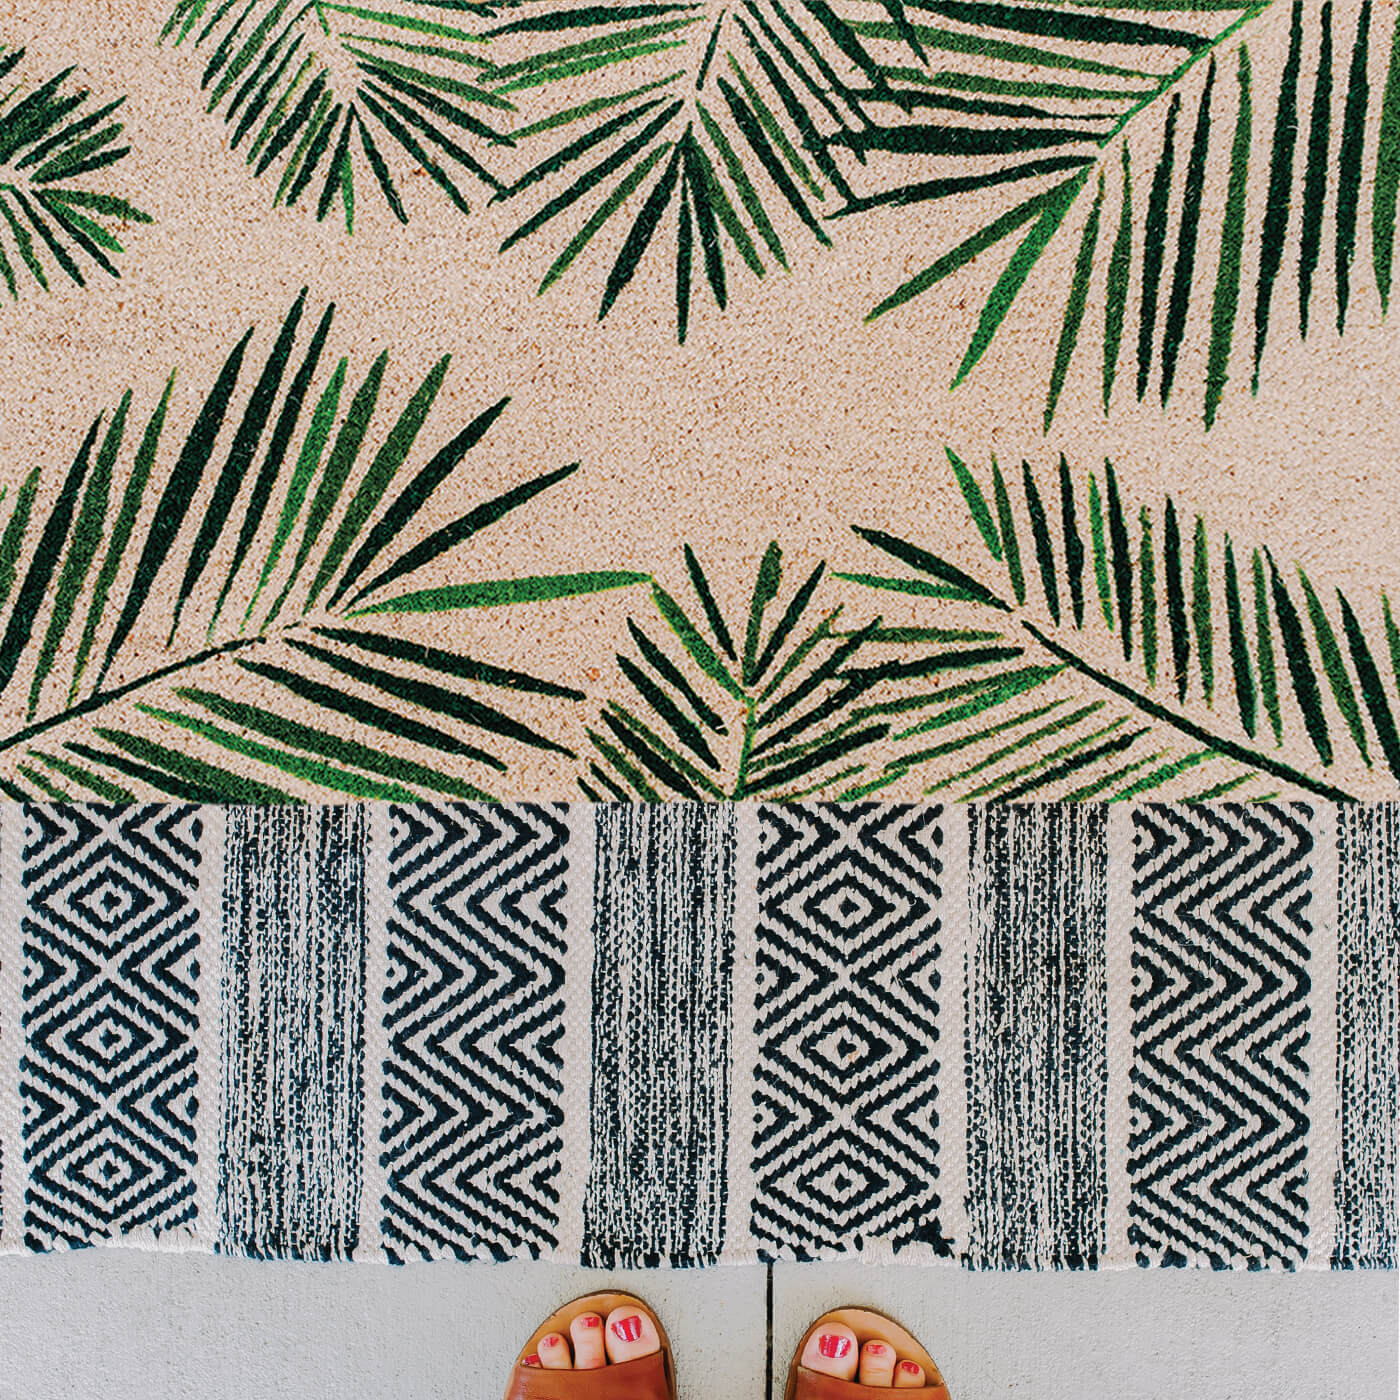 Theodore Magnus Natural Coir Doormat with non-slip backing - 17 x 30 - Outdoor / Indoor - Light Natural - Palm Springs